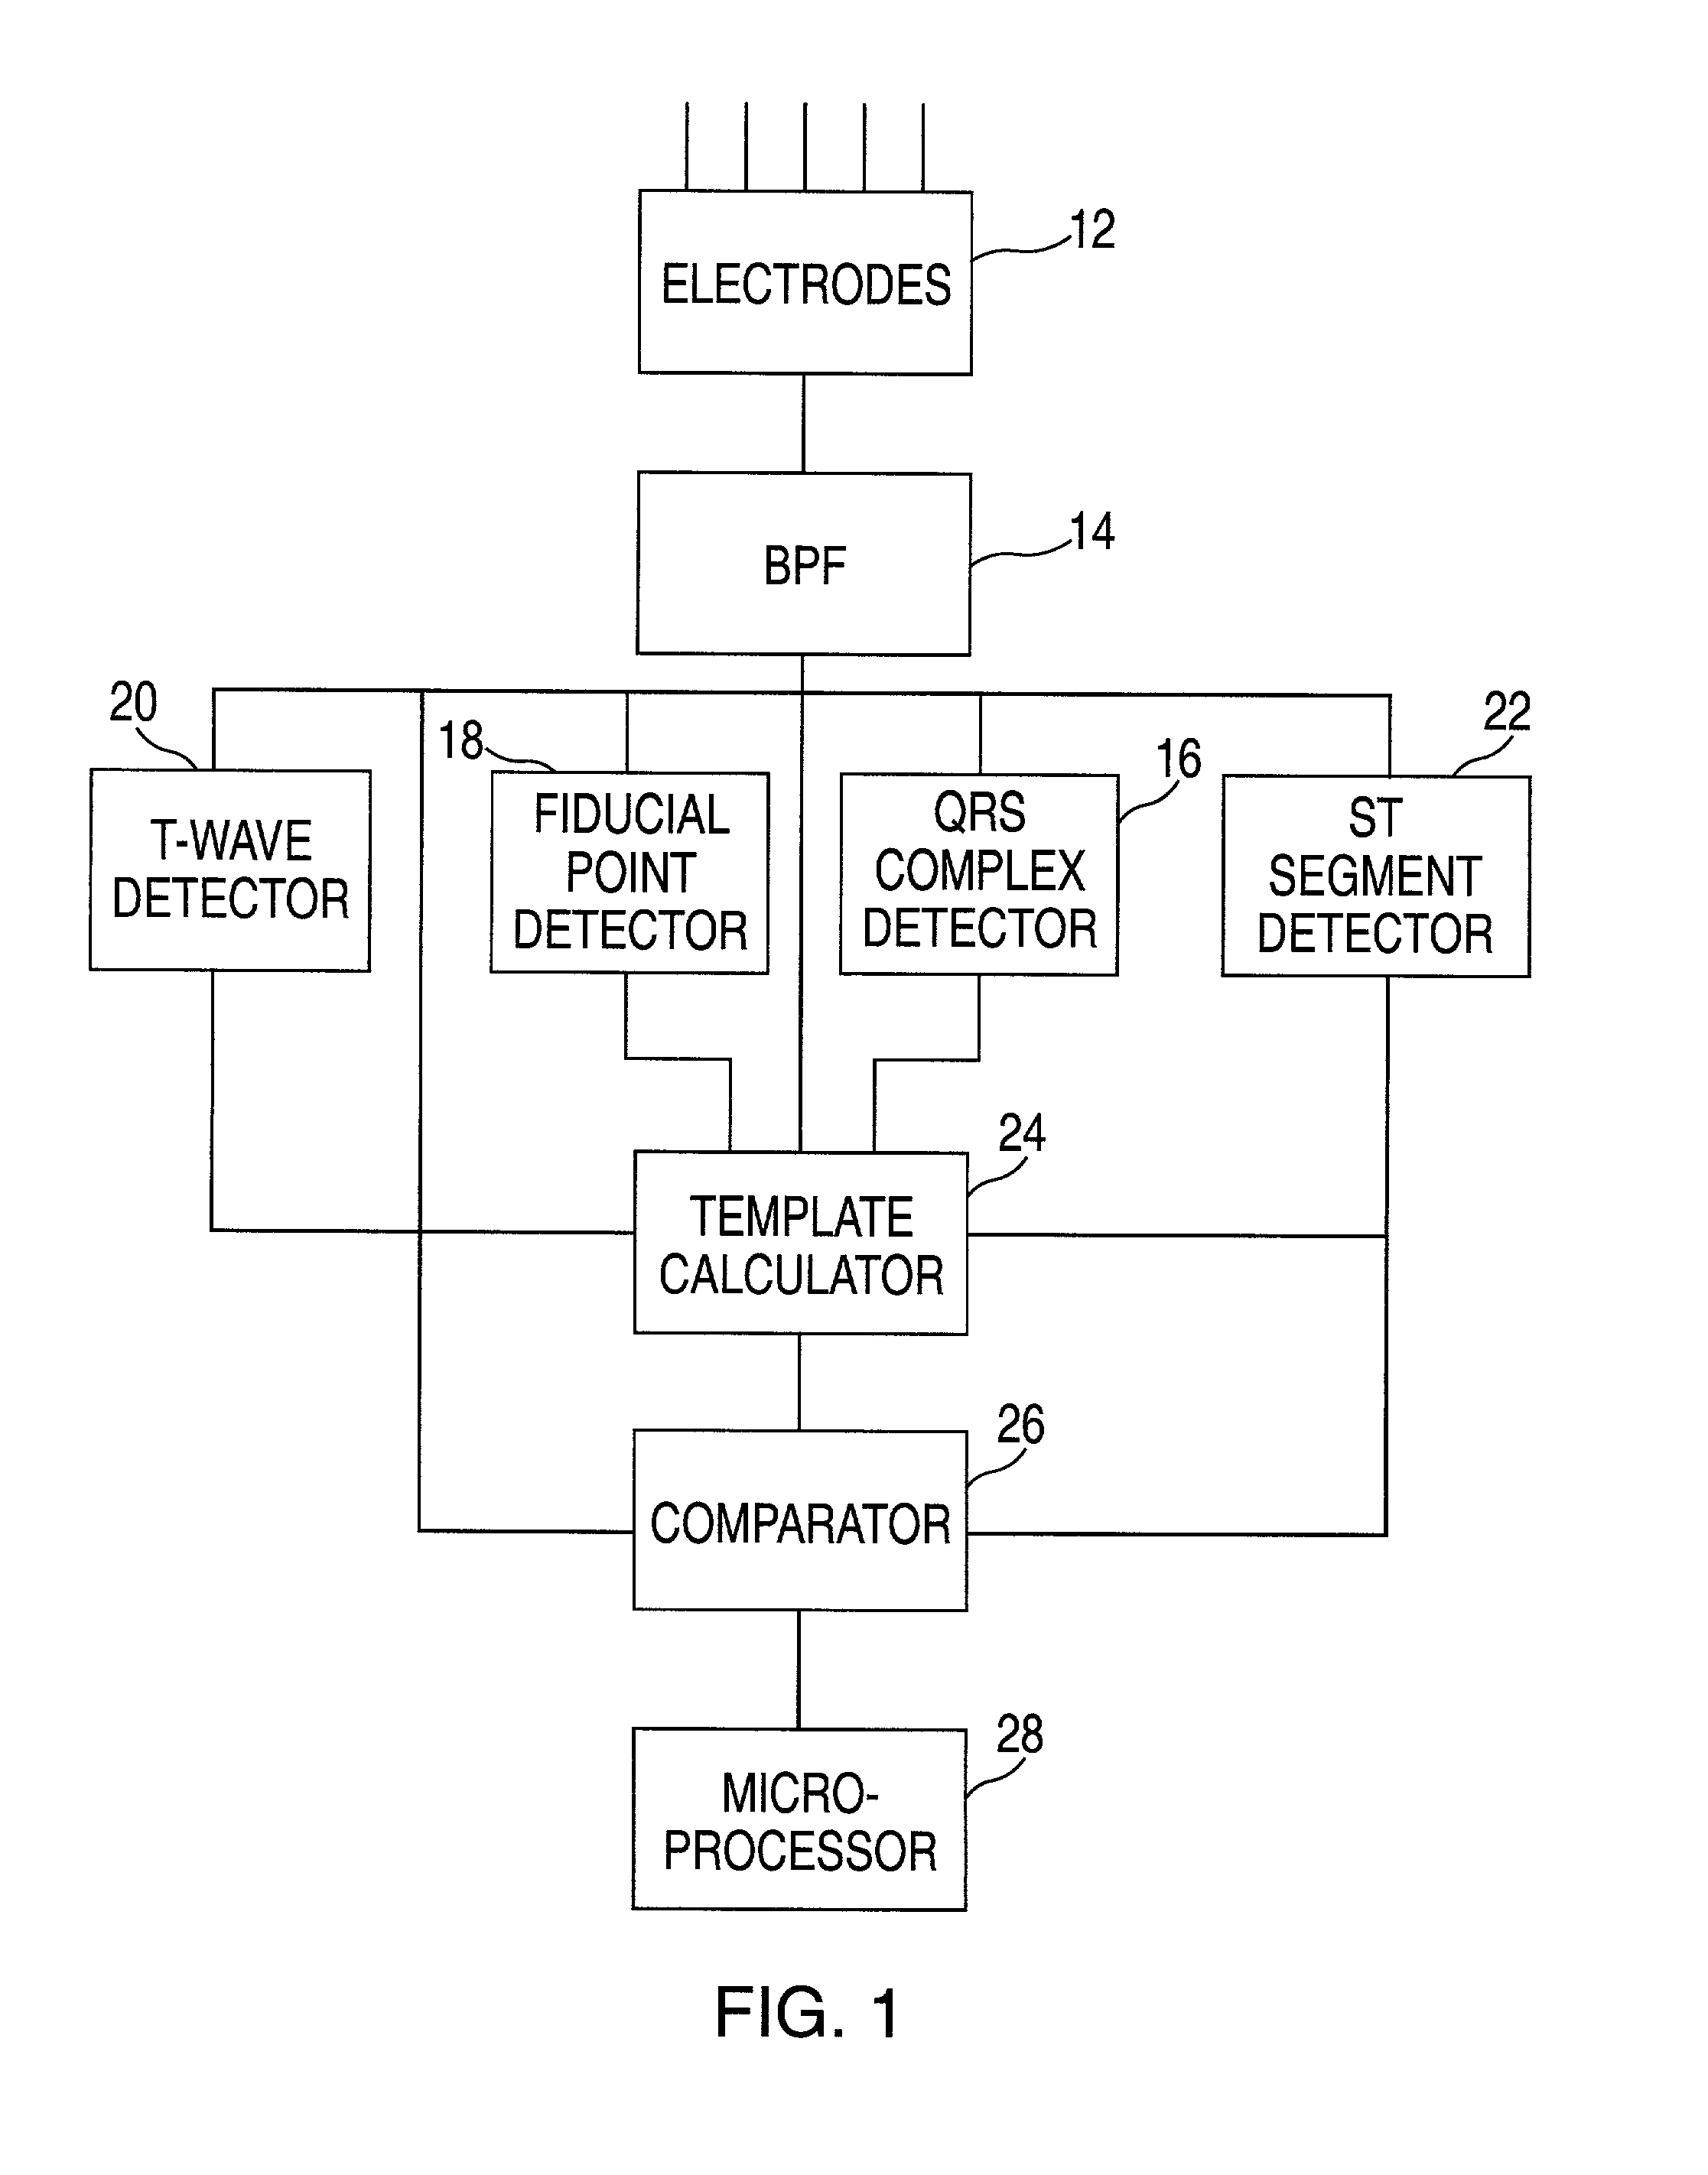 Method and apparatus for monitoring cardiac patients for T-wave alternans